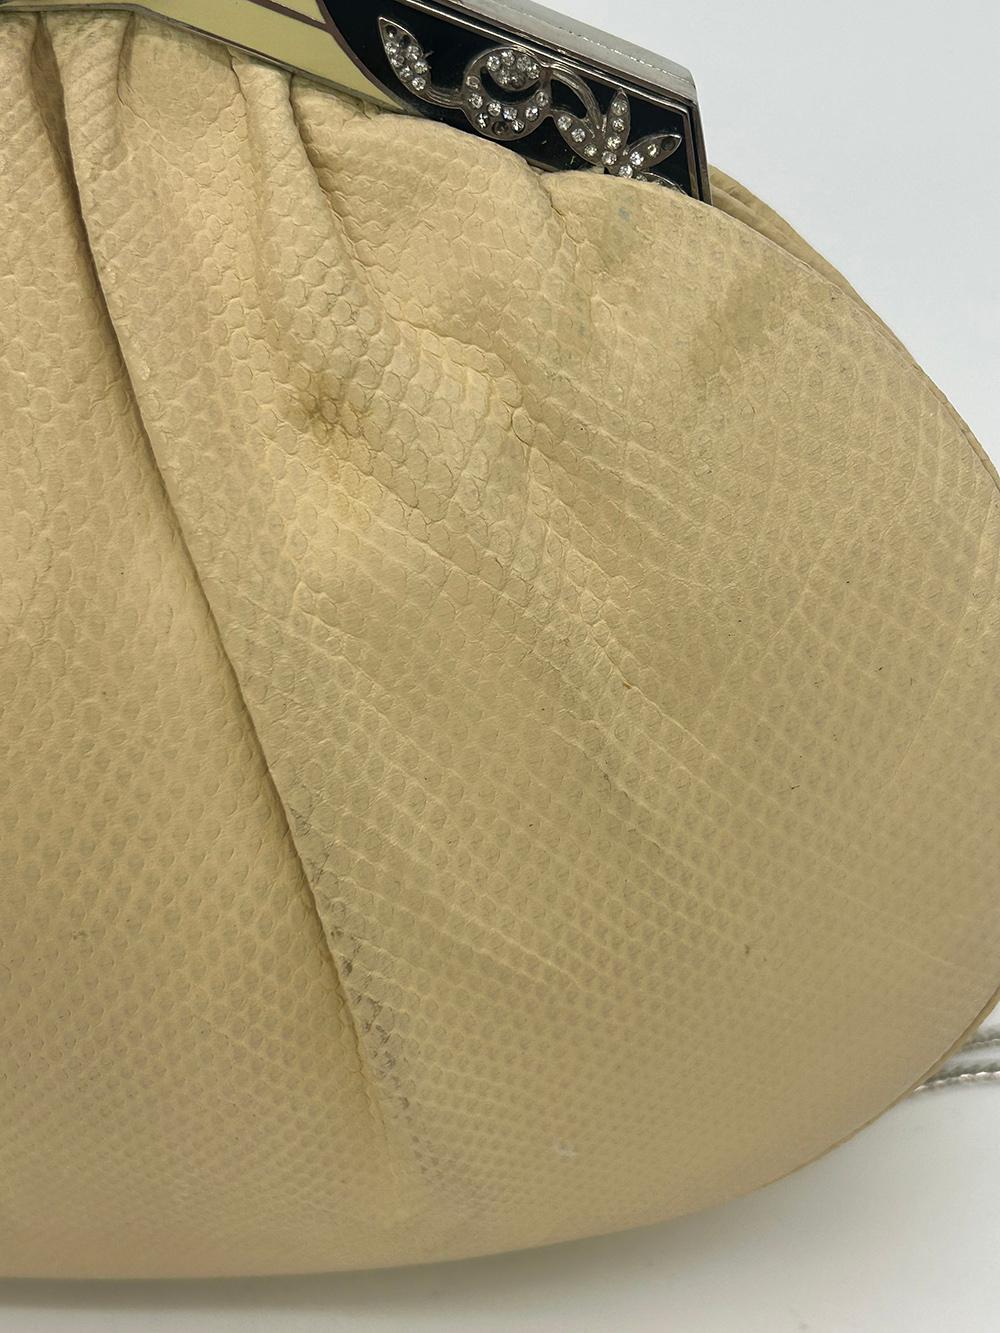 Judith Leiber Cream Matte Lizard Clutch with Enamel Crystal Top For Sale 13